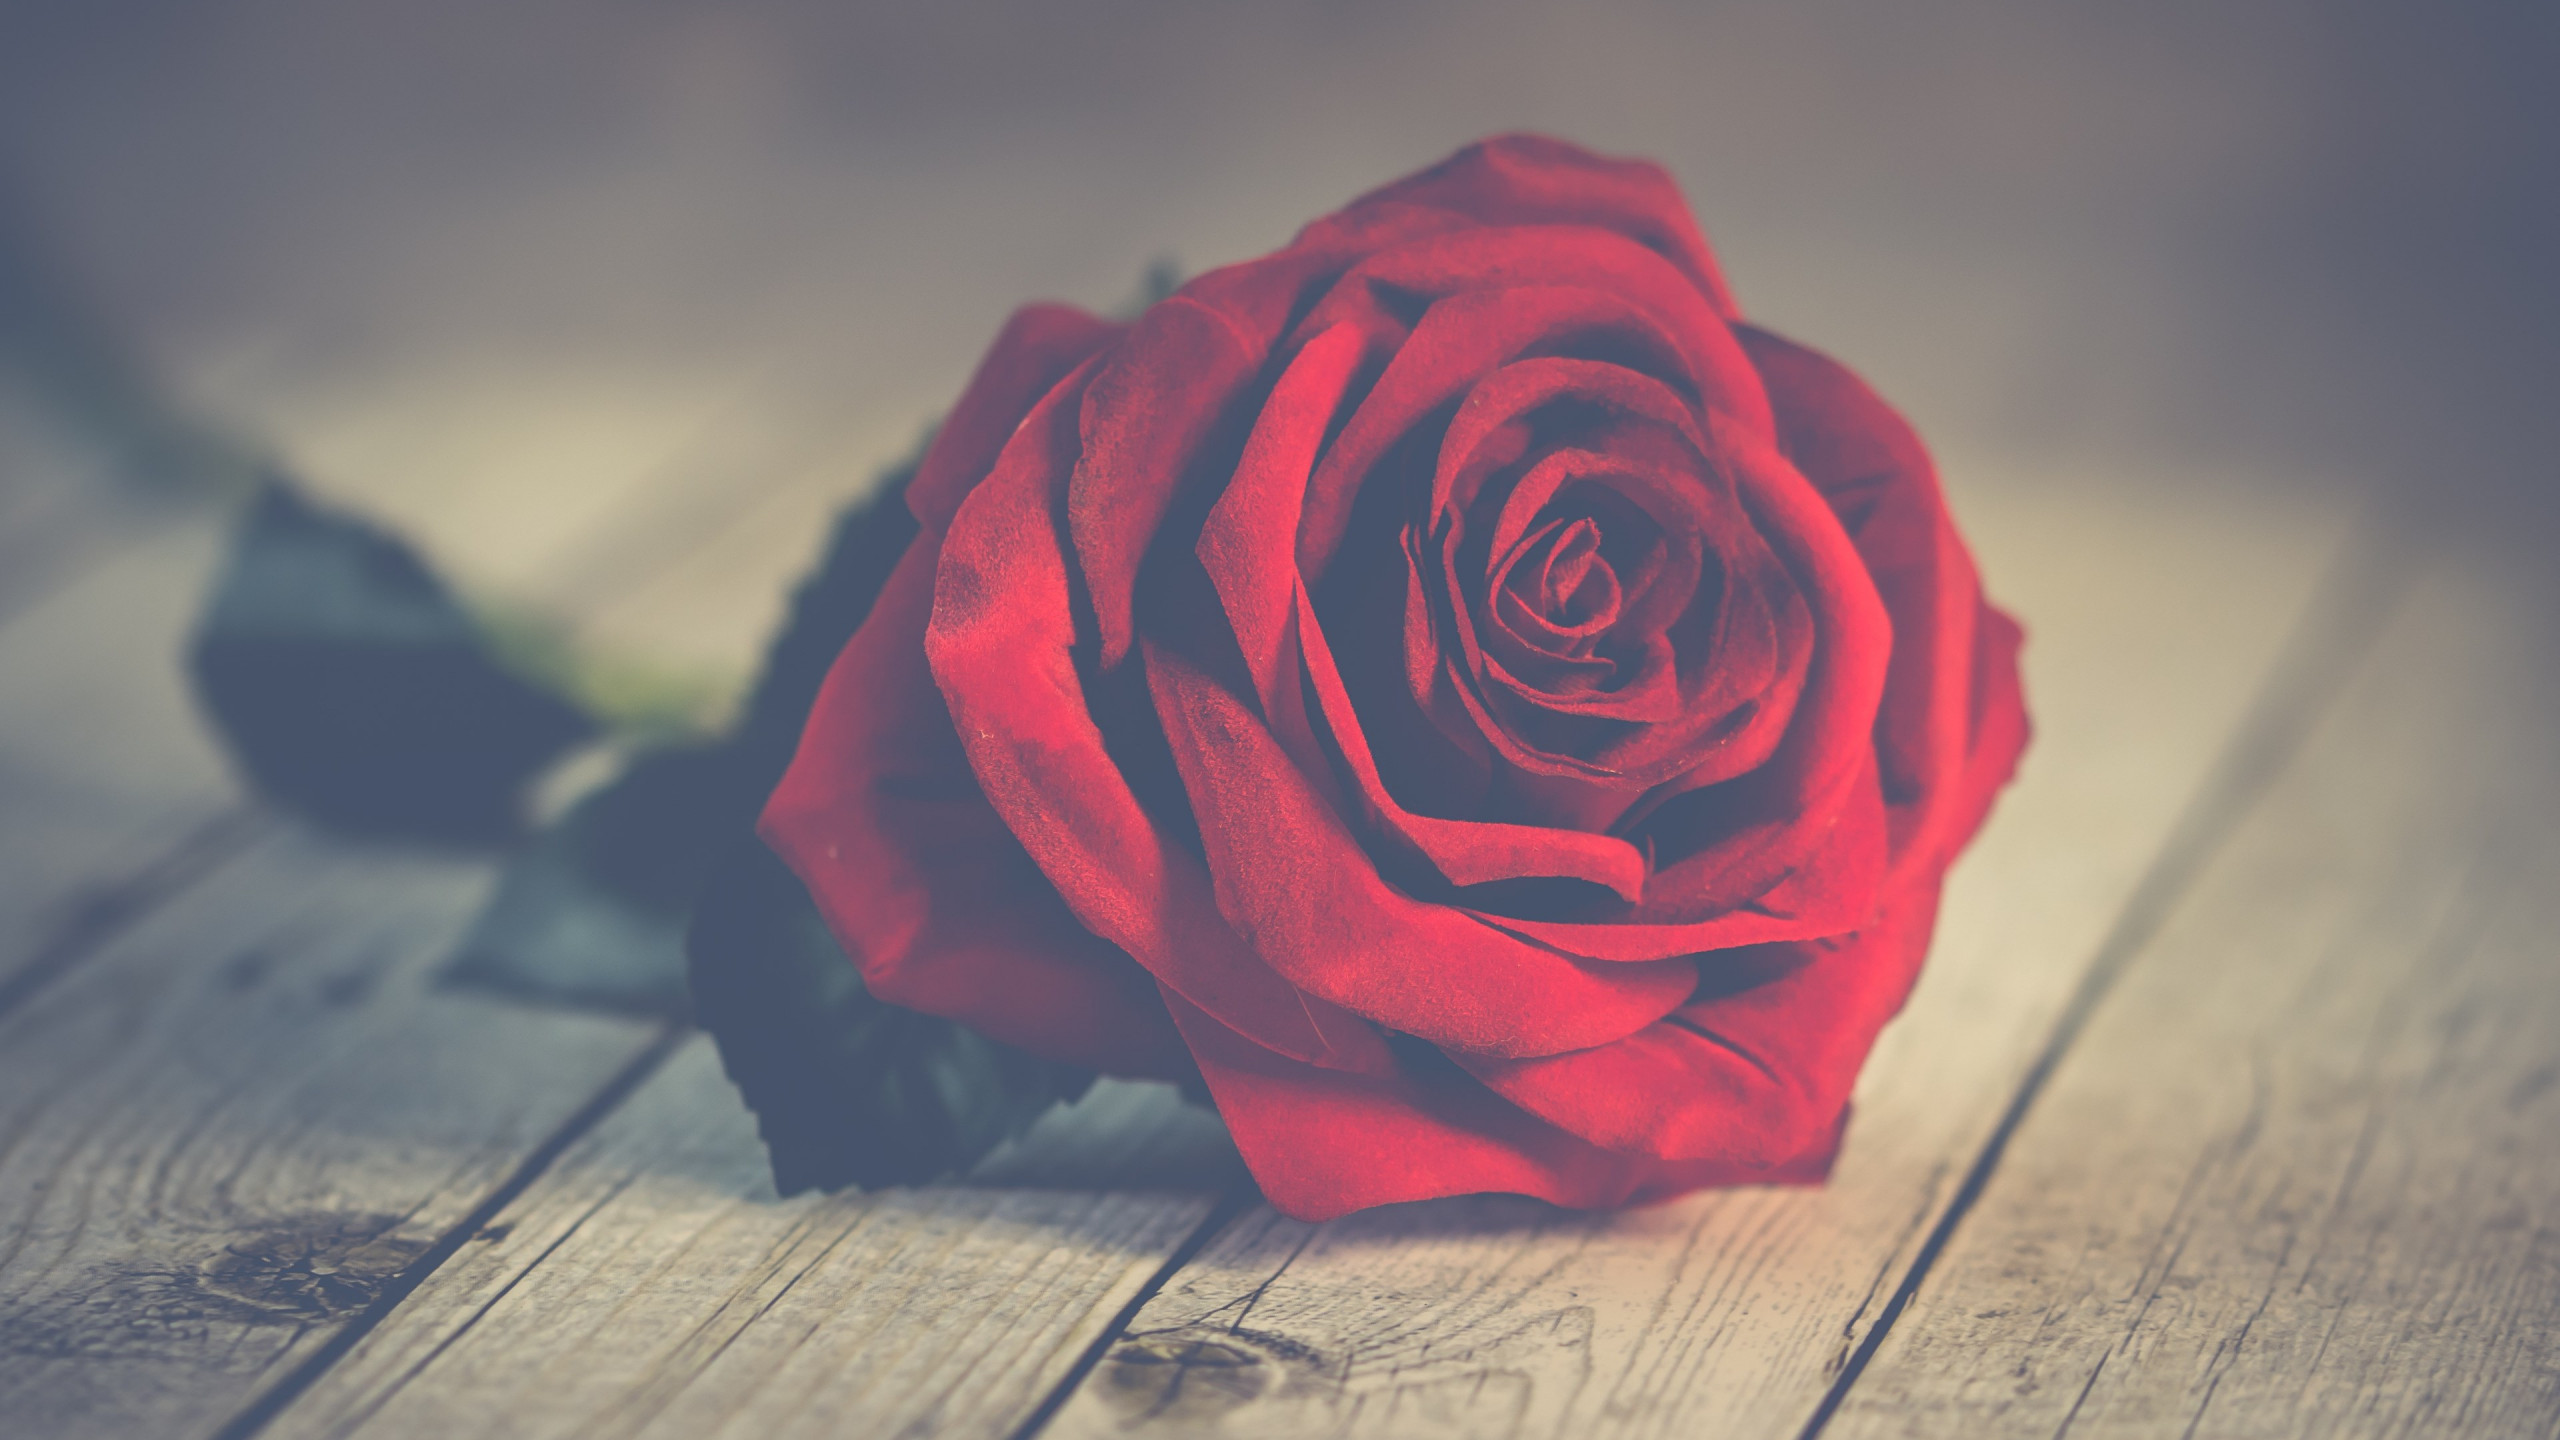 Perfect Red Rose - Red Rose Romantic Flowers , HD Wallpaper & Backgrounds